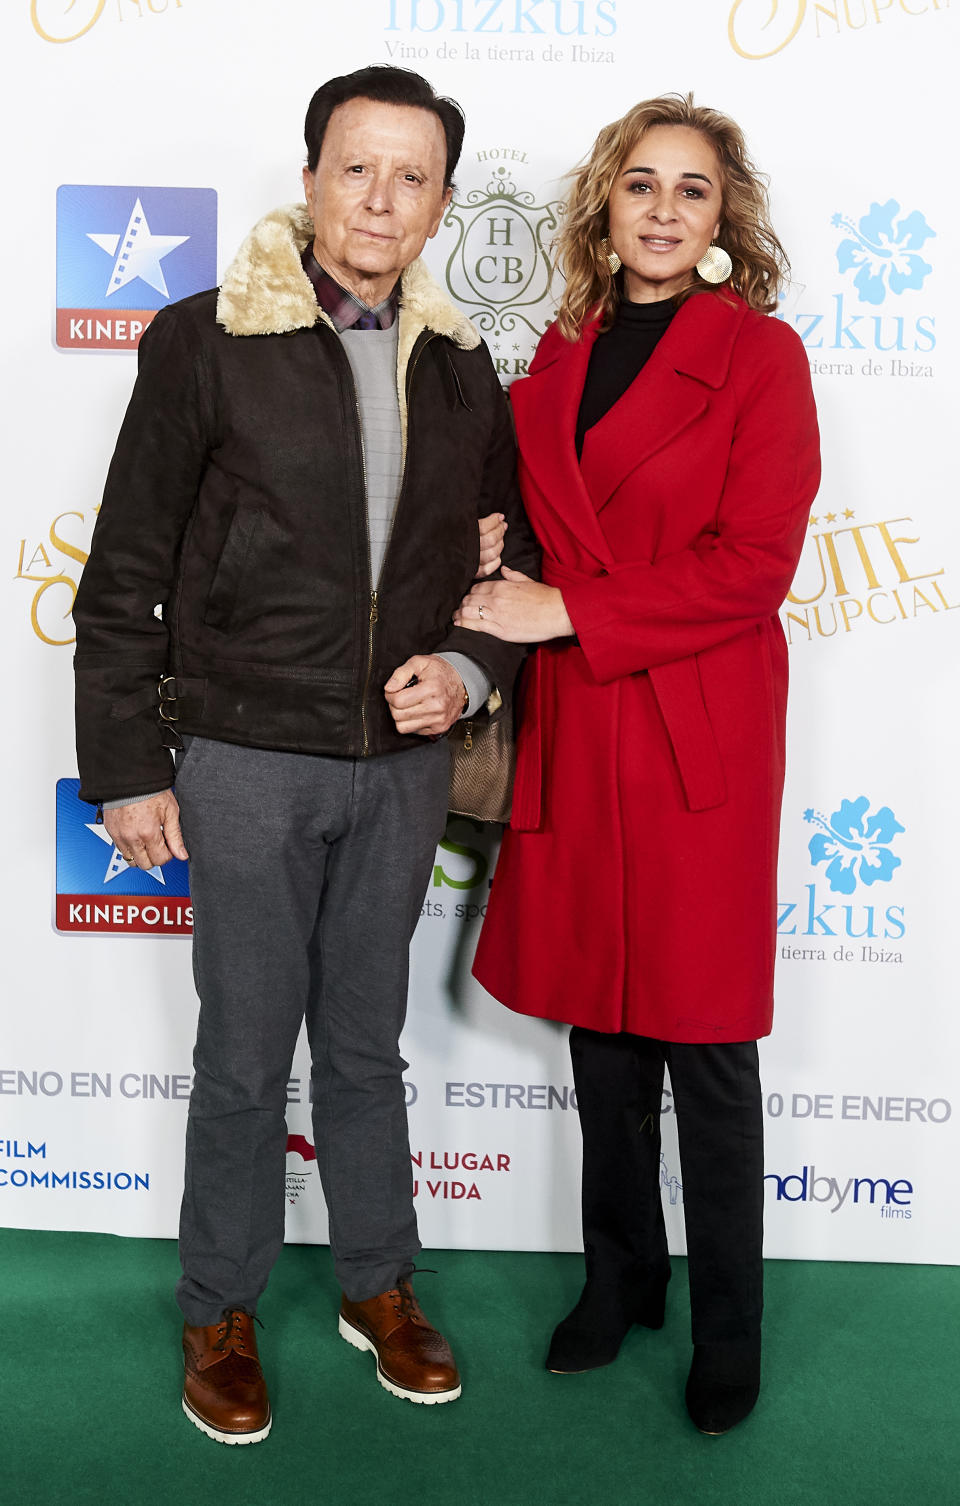 MADRID, SPAIN - JANUARY 09: Jose Ortega Cano and Ana Maria Aldon attends 'La suite nupcial' premiere at Kinepolis on January 09, 2020 in Madrid, Spain. (Photo by Borja B. Hojas/Getty Images)